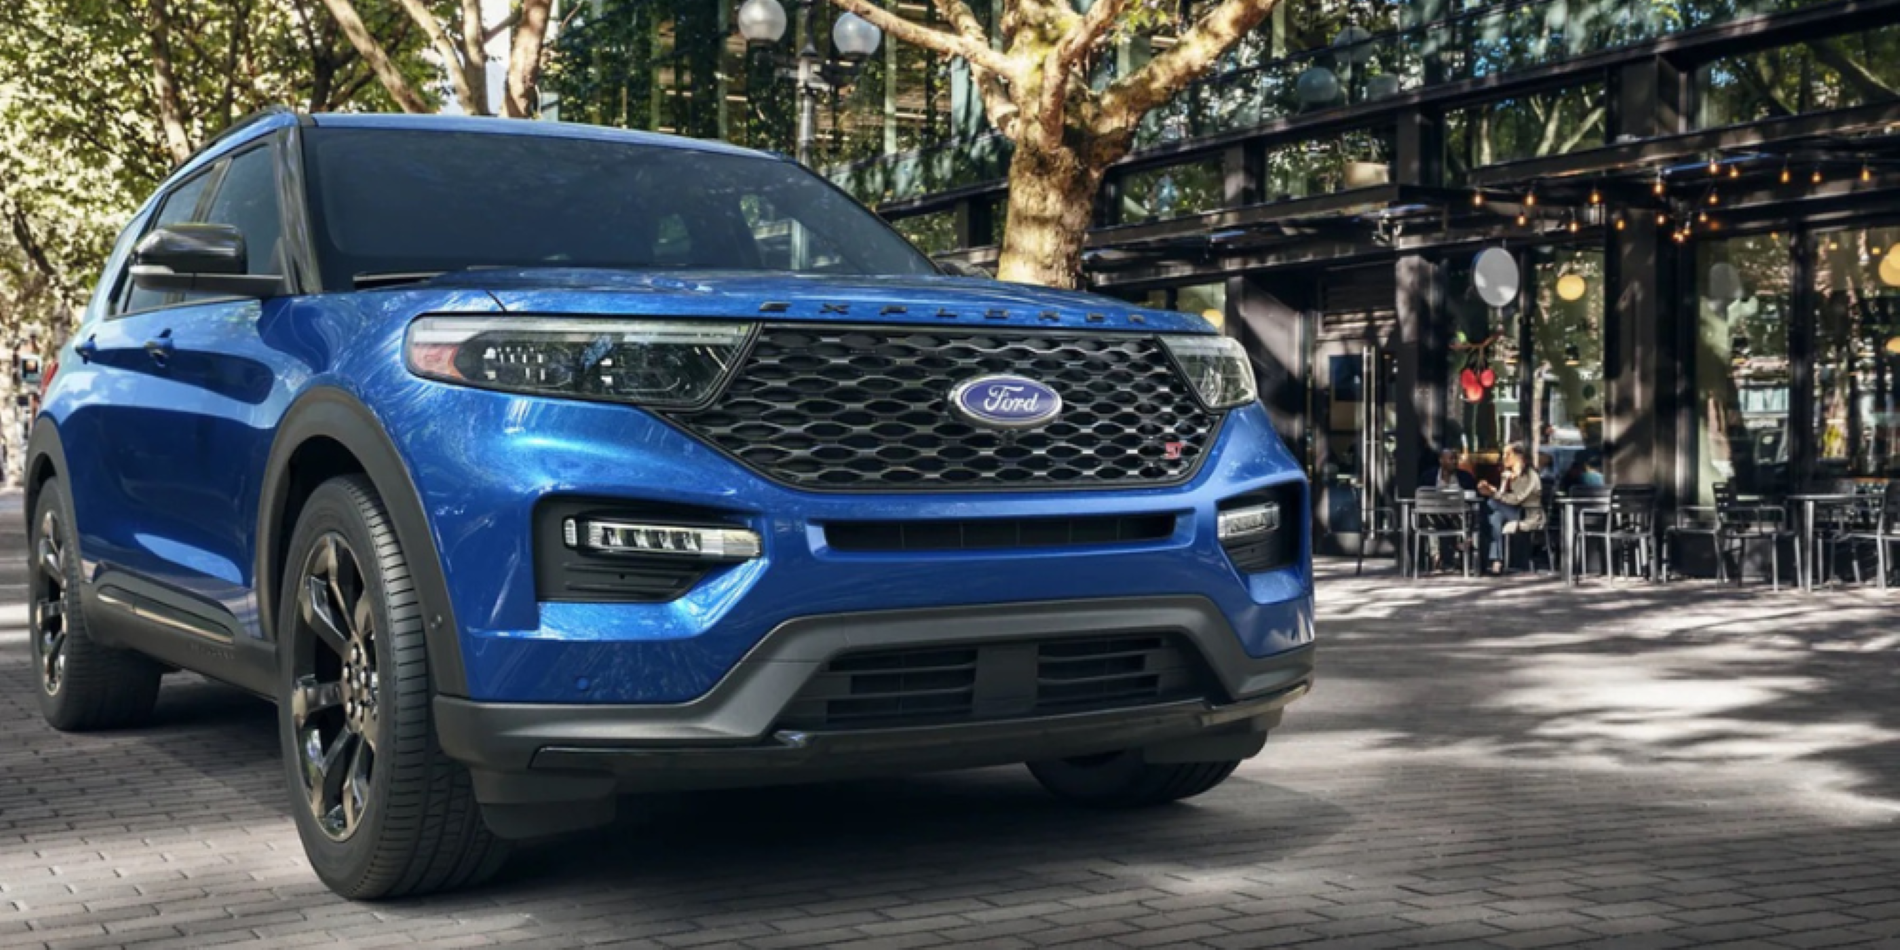 The Ford Explorer offers a sport style steering wheel, heated steering wheel, second row captain's chairs, LED signature lighting heated, leather seats, and backup assist grid lines